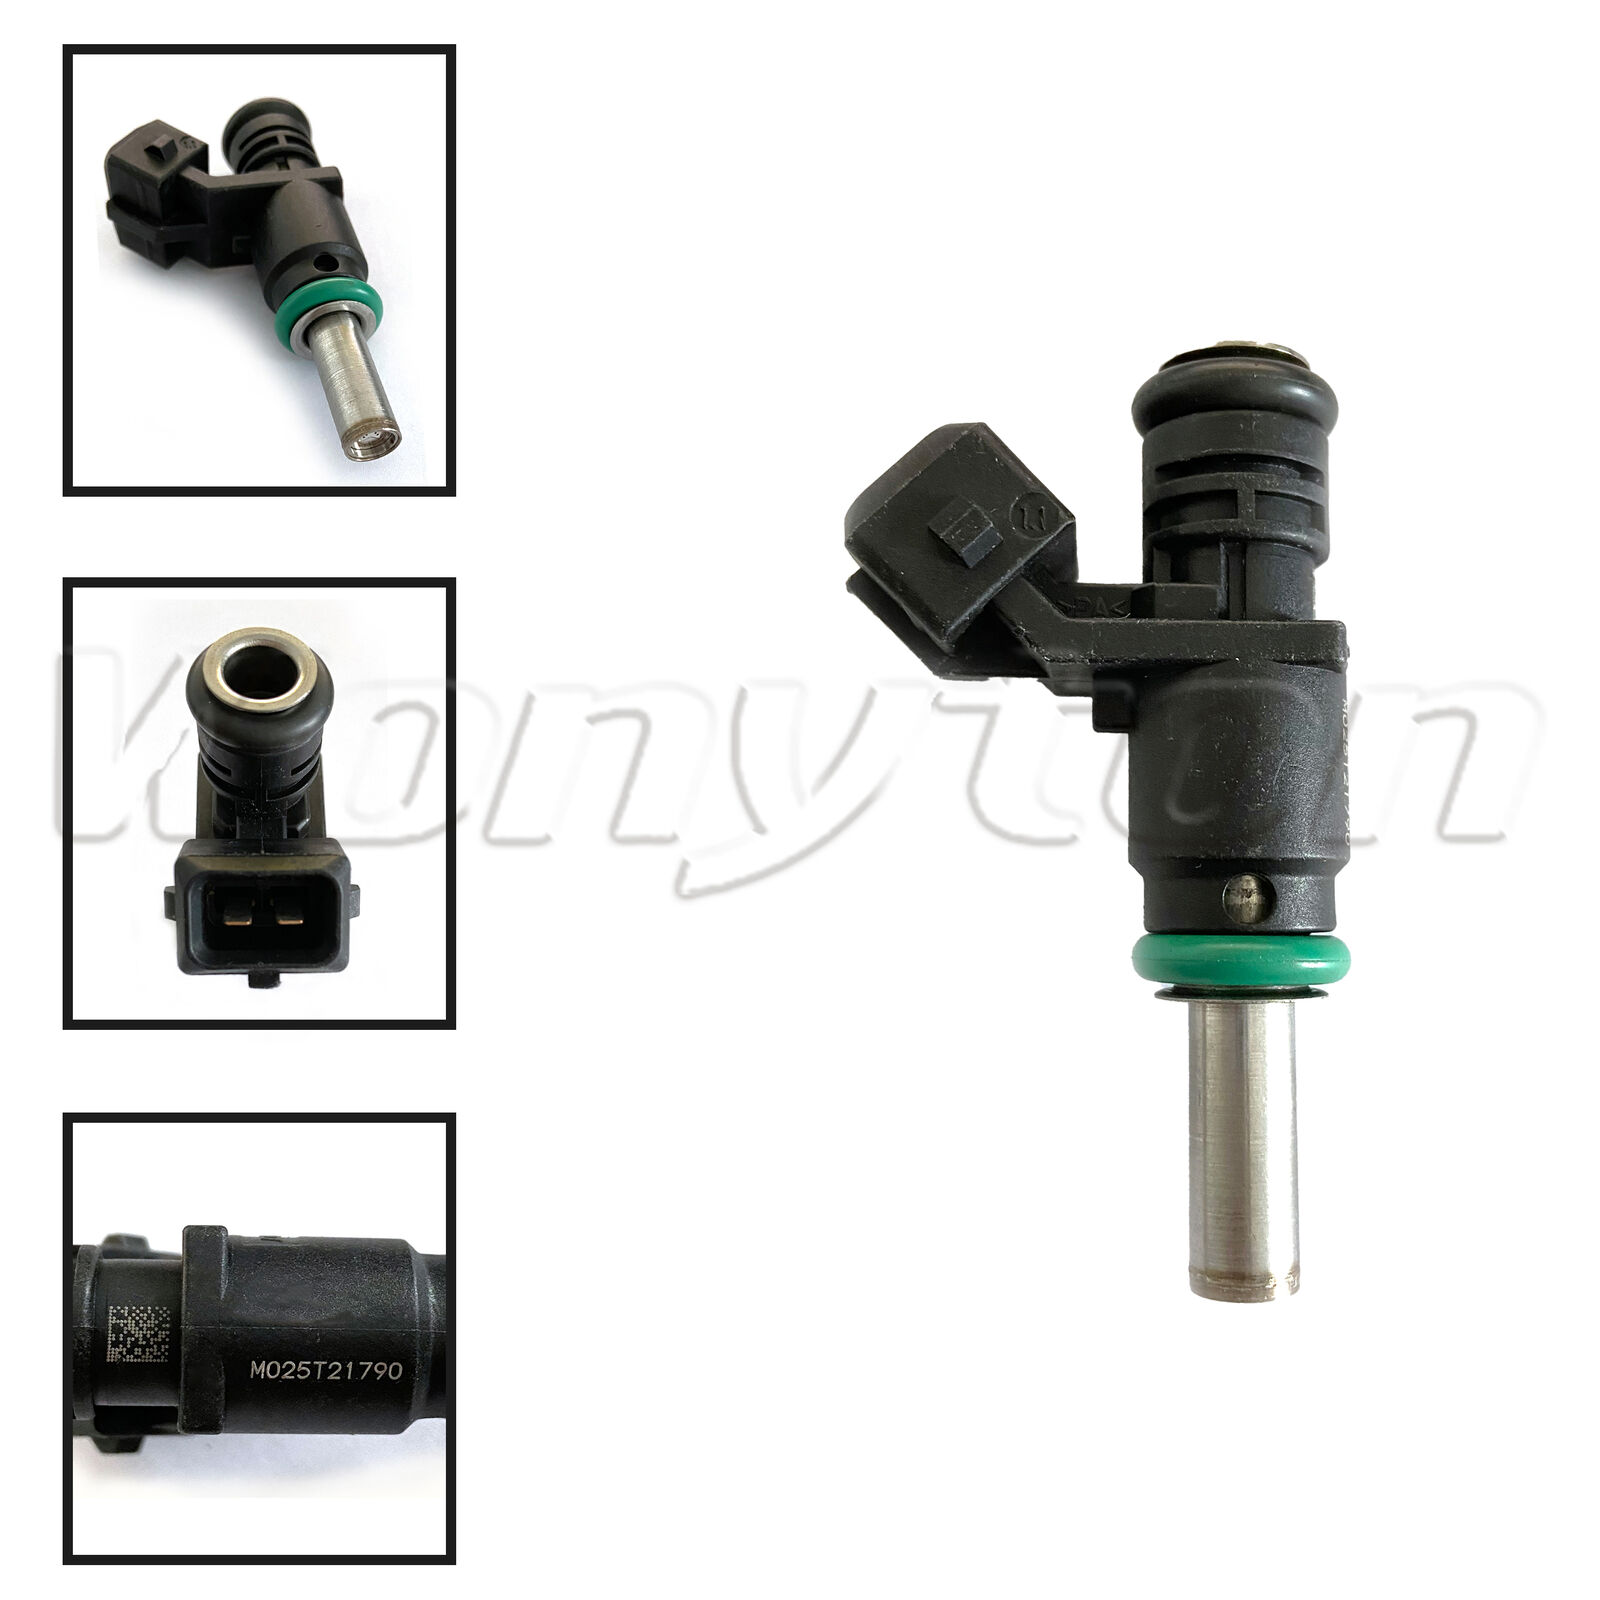 1x 0470-884 Fuel injector New For Arctic Cat Wildcat Fuel SYNERJECT INJECTOR